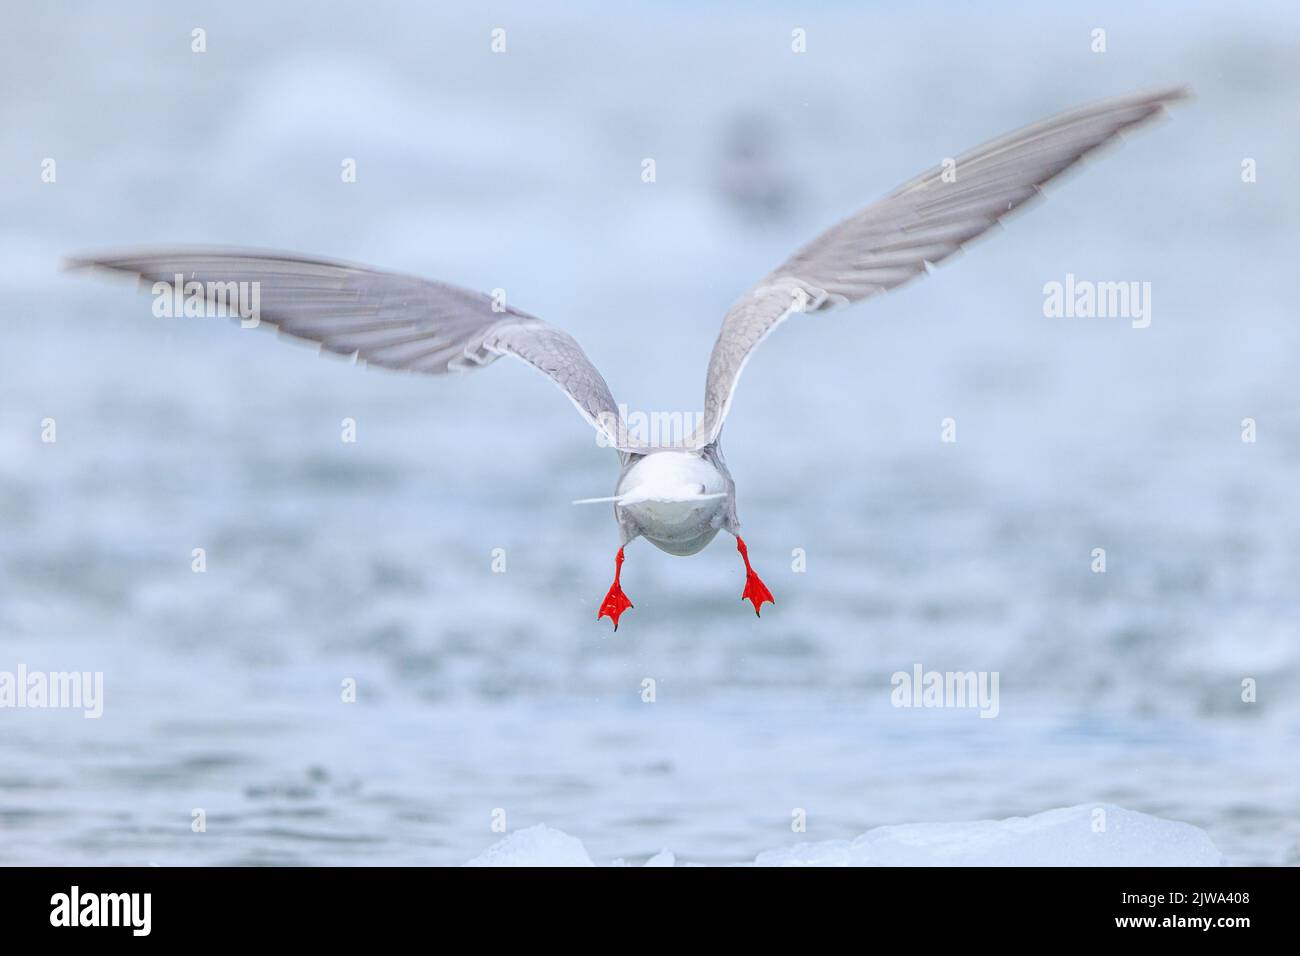 a rear view of an arctic tern just taken flight over an icy sea wings outstretched and bright red legs extended down showing webbed feet Stock Photo